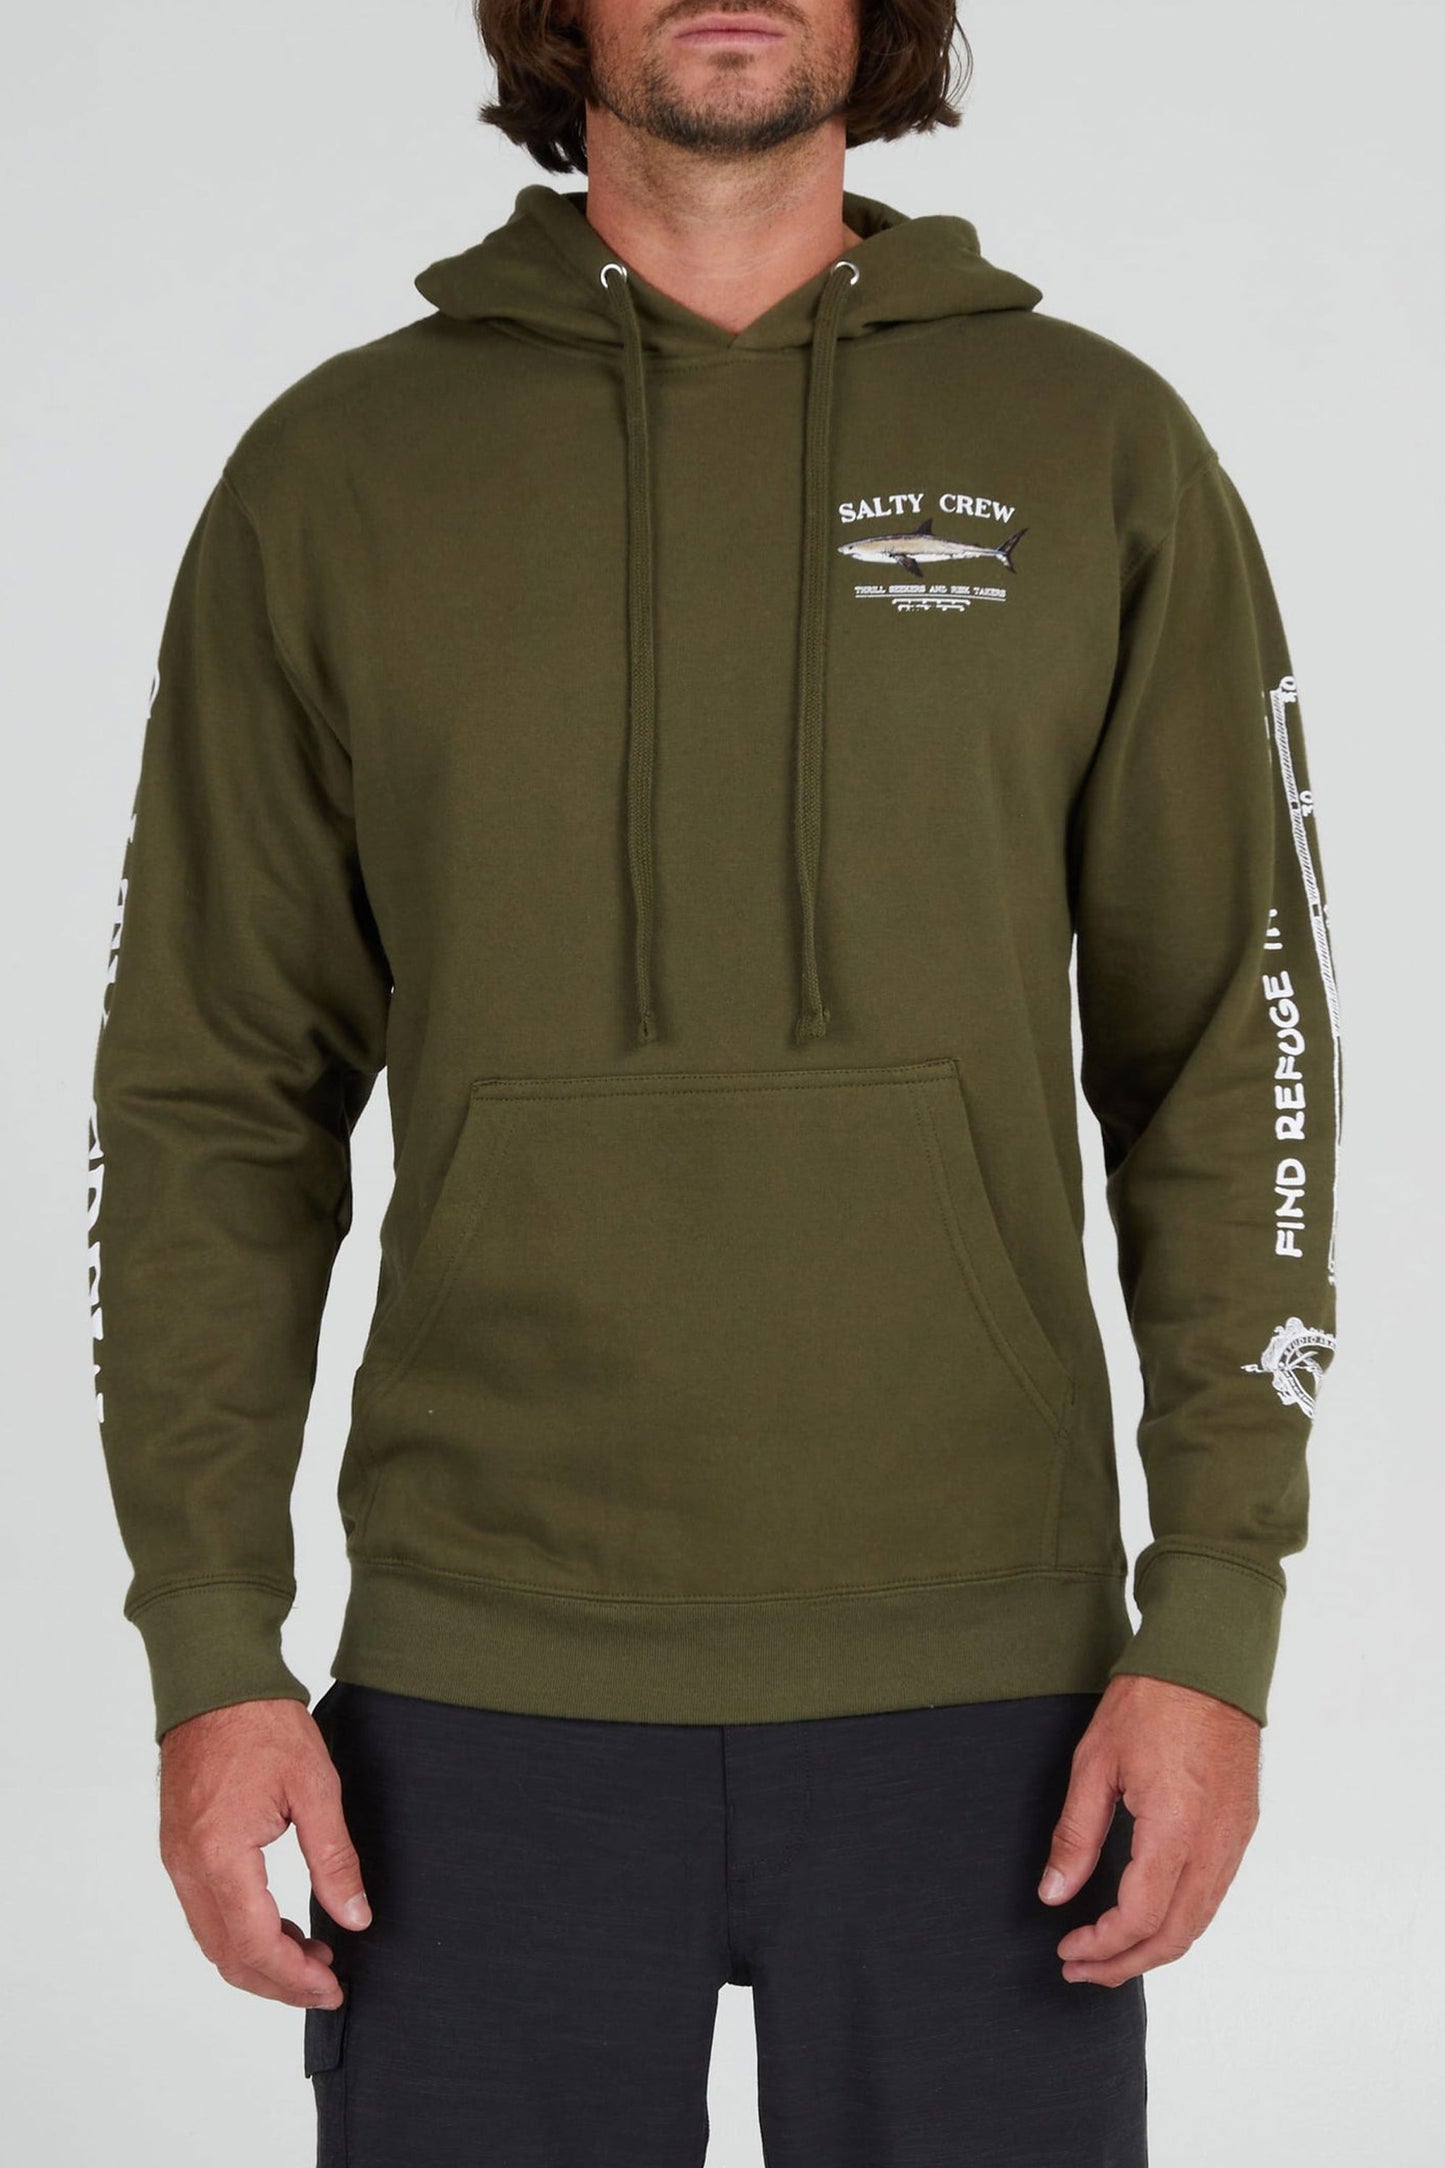 Pukas-Surf-Shop-Salty-Crew-Sweater-Bruce-Army